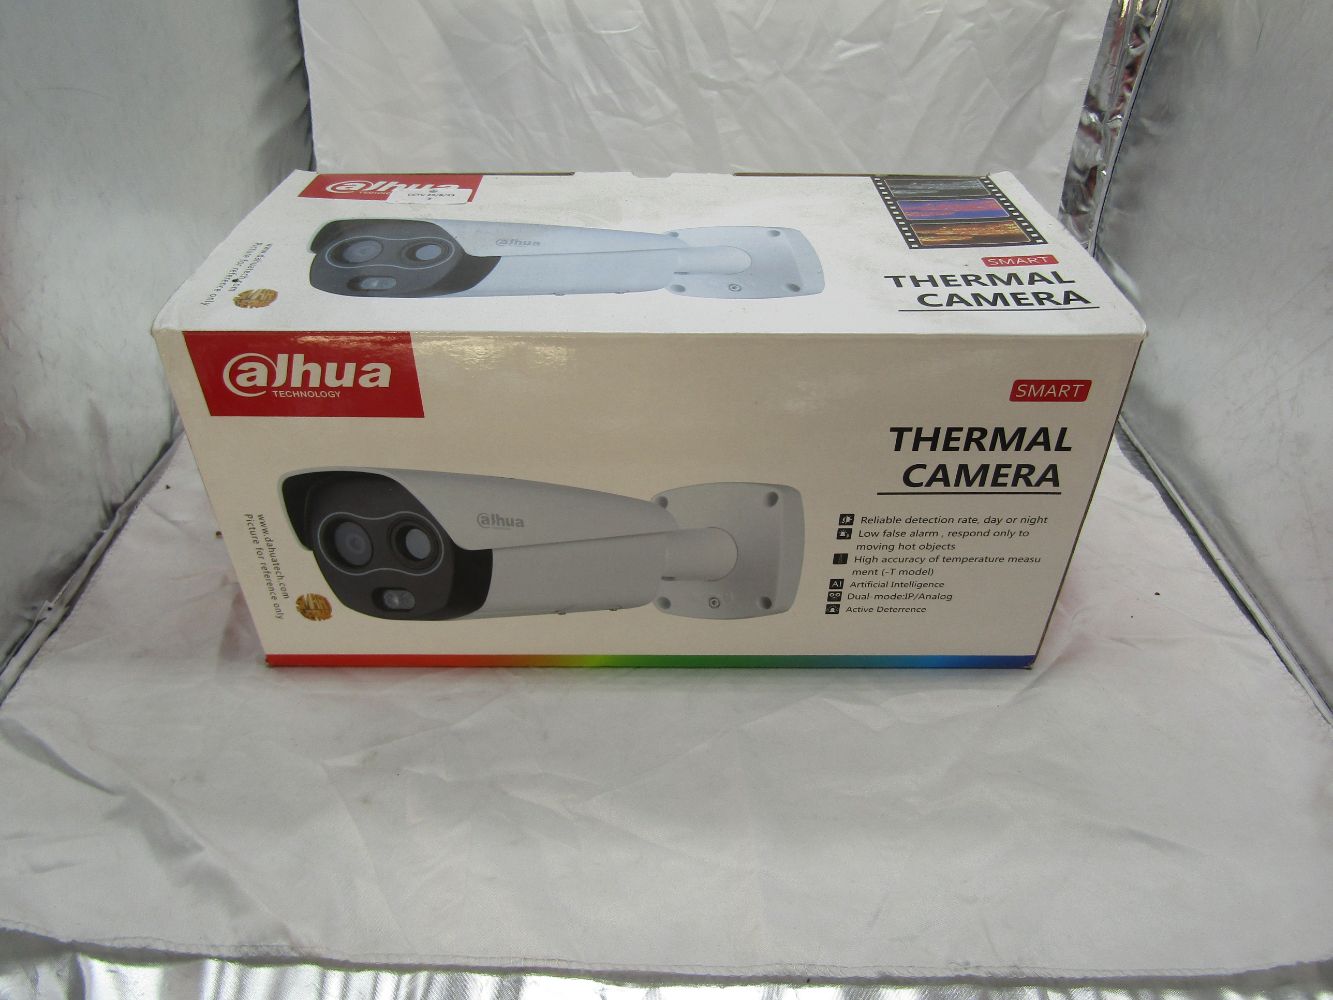 Provision CCTV cameras and systems starting some starting at just 10% of retail